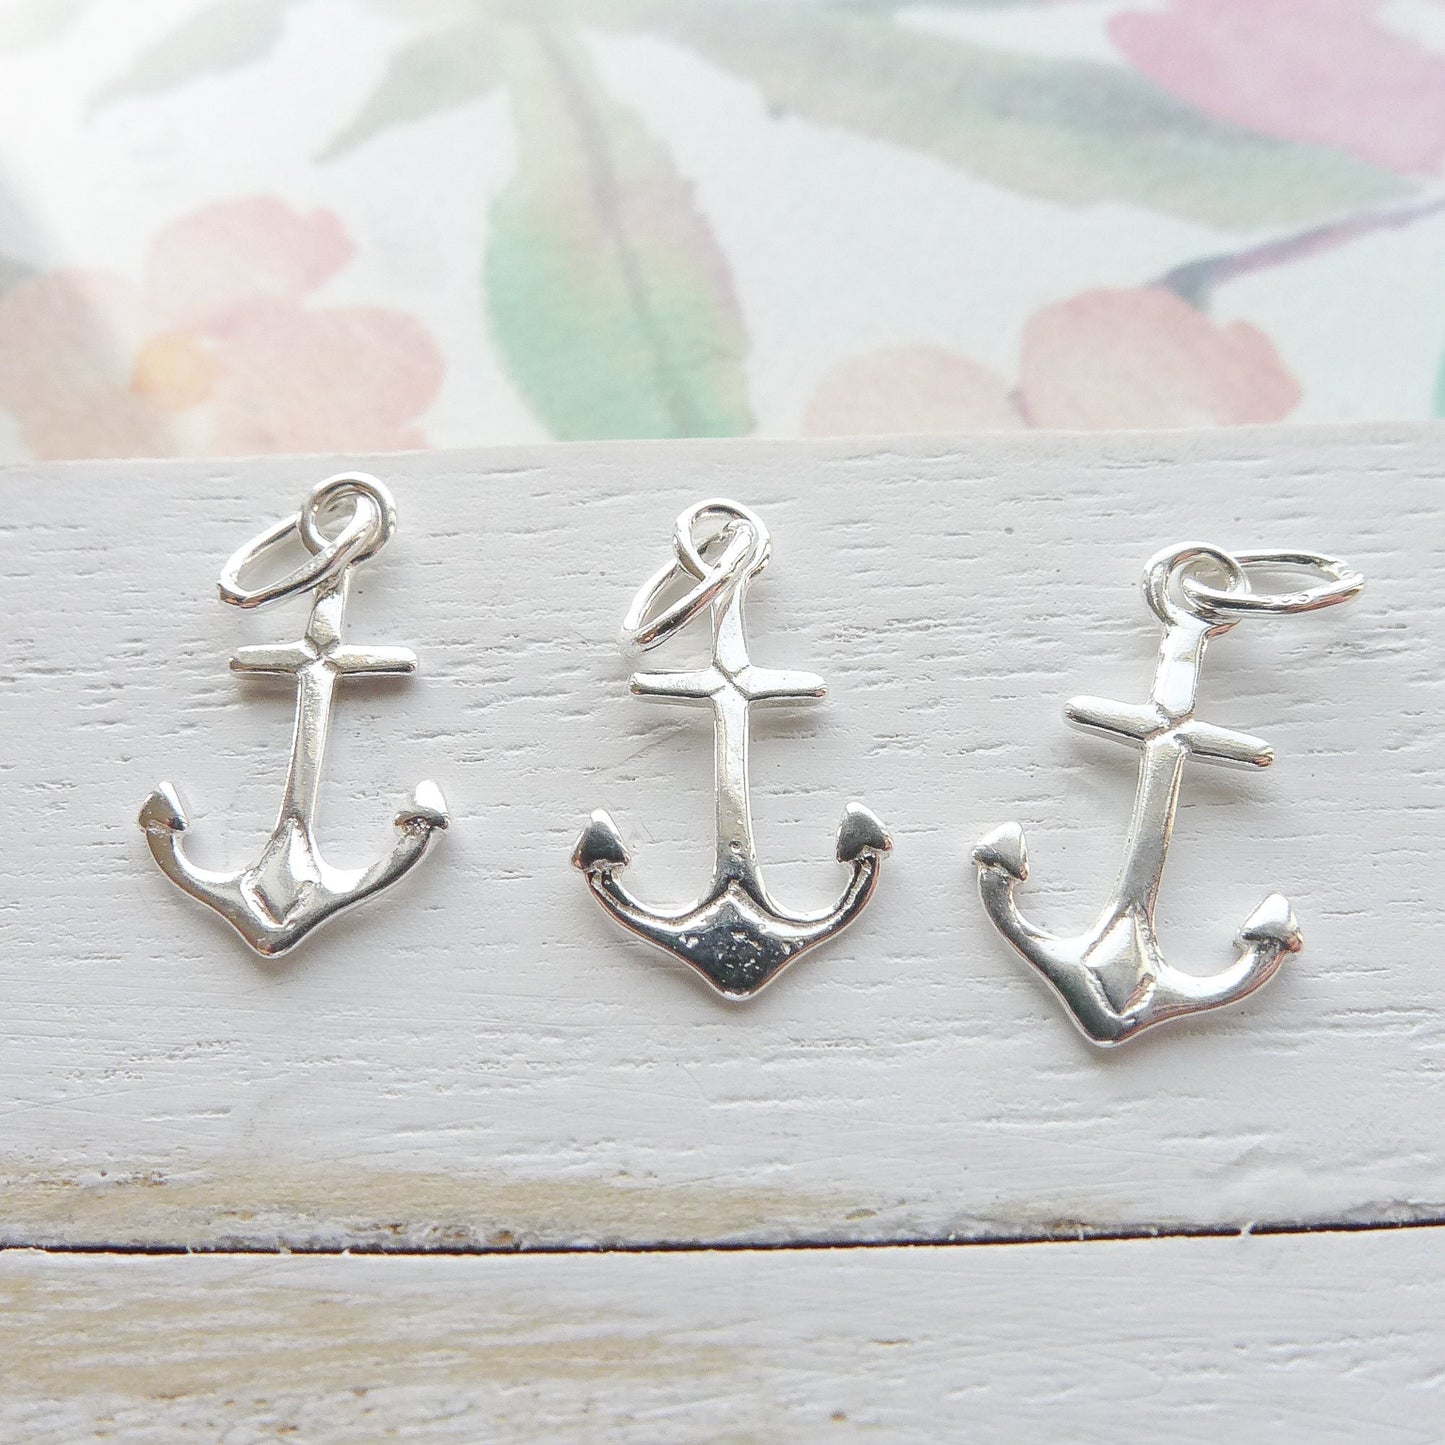 Anchor Charm Sterling Silver Yacht Club Boat Pendant Ocean Gift